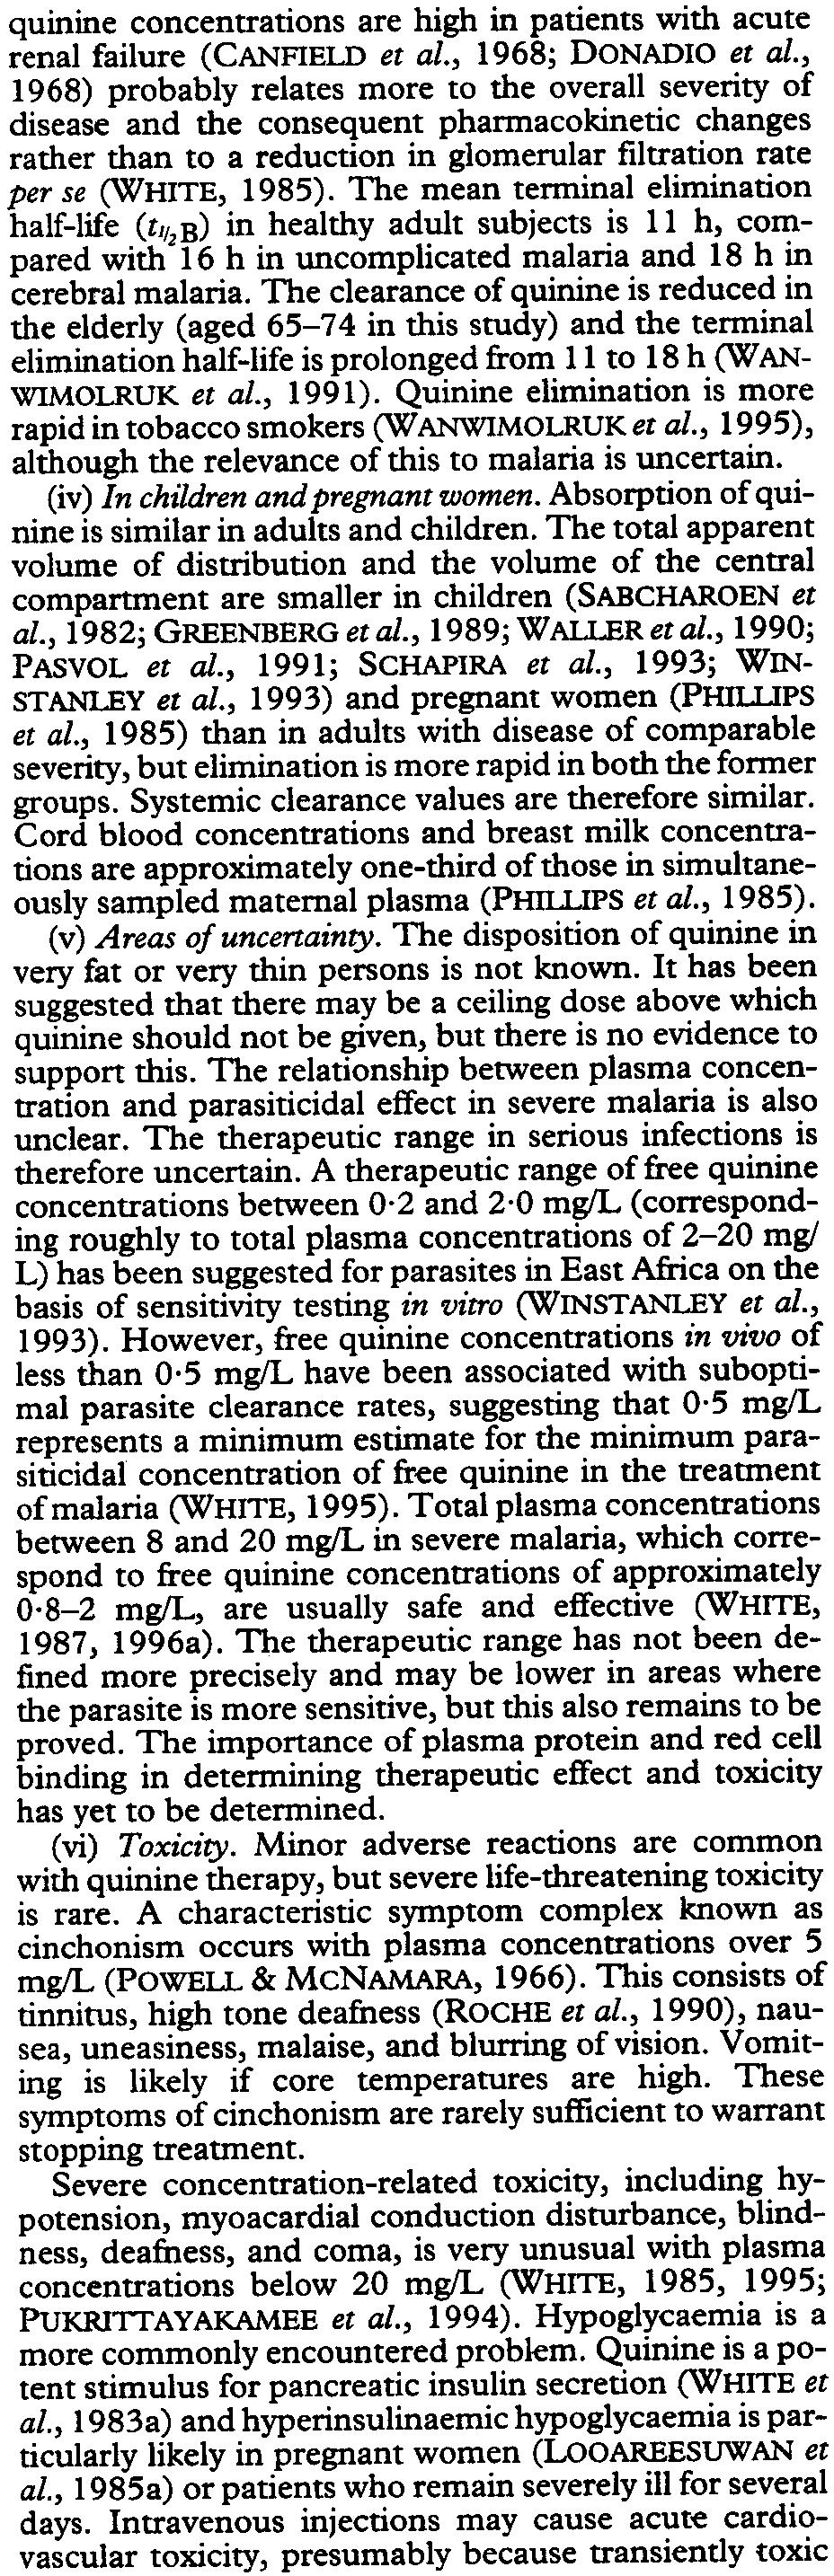 I), 40% lower than the value in adults (WINSTANLEY et al., 1993). This explains why intravenous injections of quinine are potentially so dangerous in severe infections.